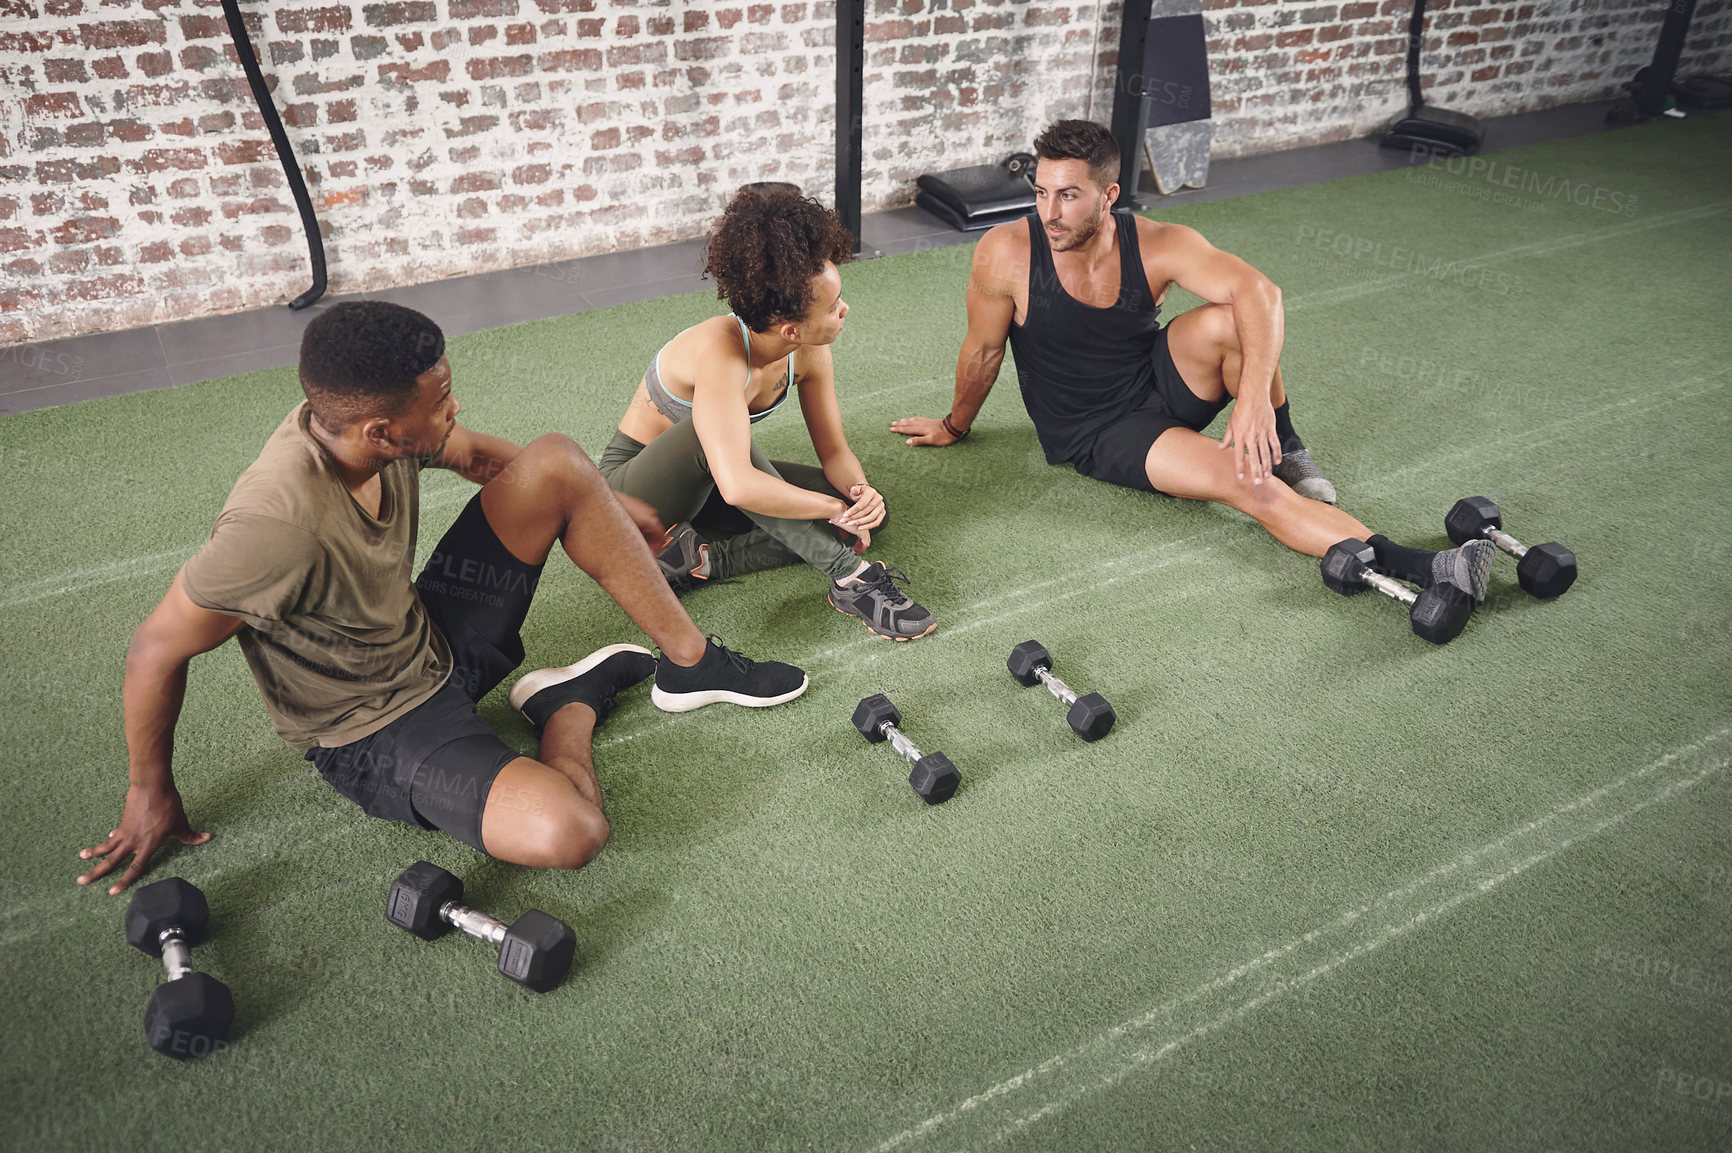 Buy stock photo Shot of a fitness group resting after working out with dumbbells